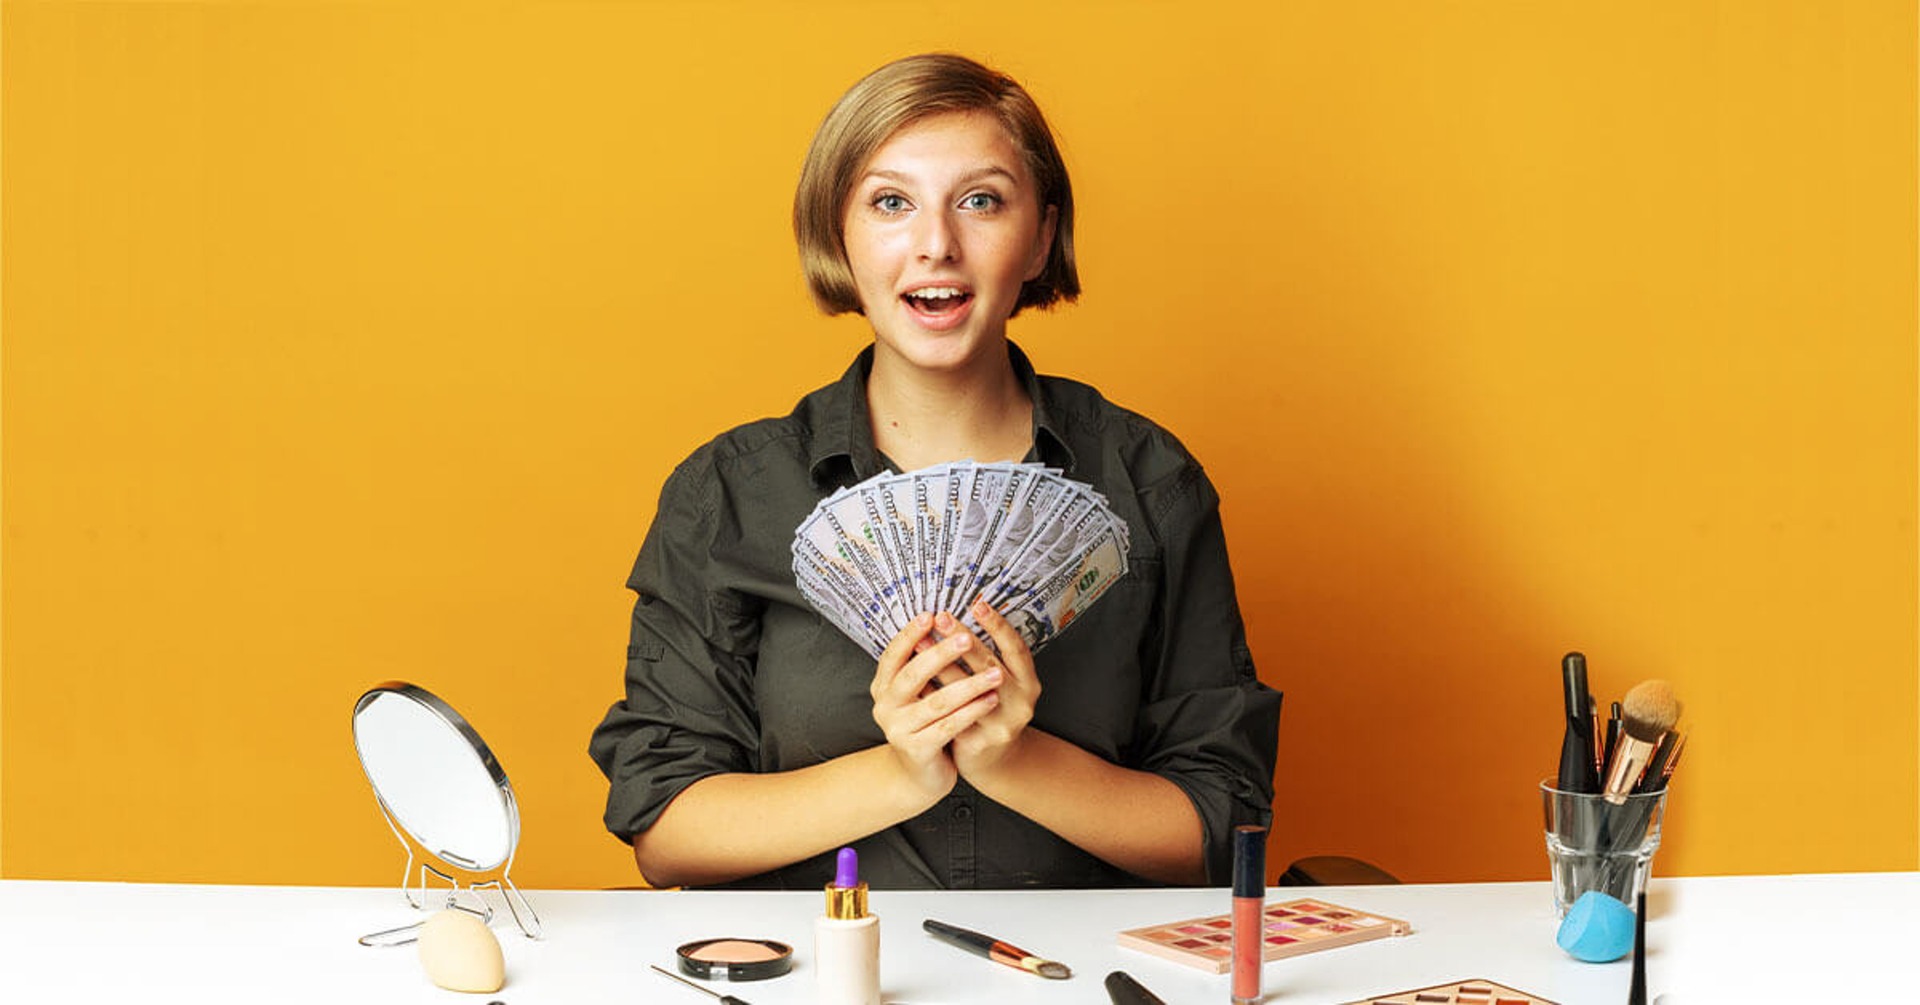 Female makeup vlogger holding hundred-dollar bills seated behind a table with small round mirror and makeup kits